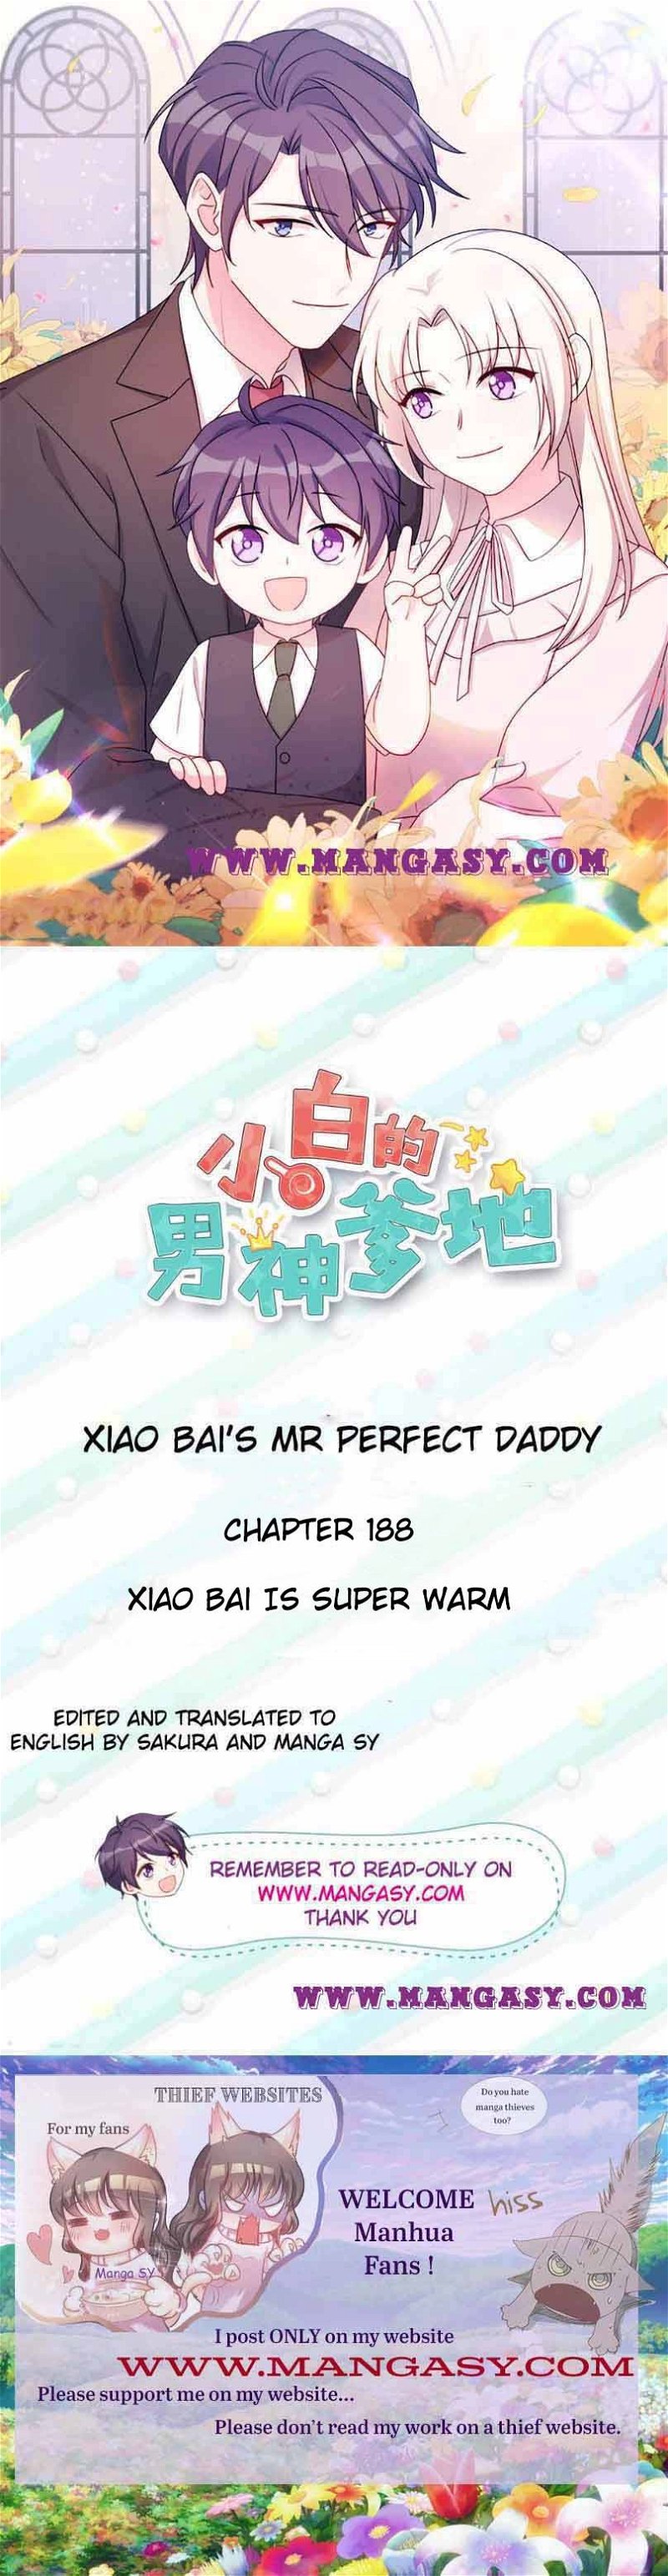 Xiao Bai’s father is a wonderful person Chapter 188 - Page 0